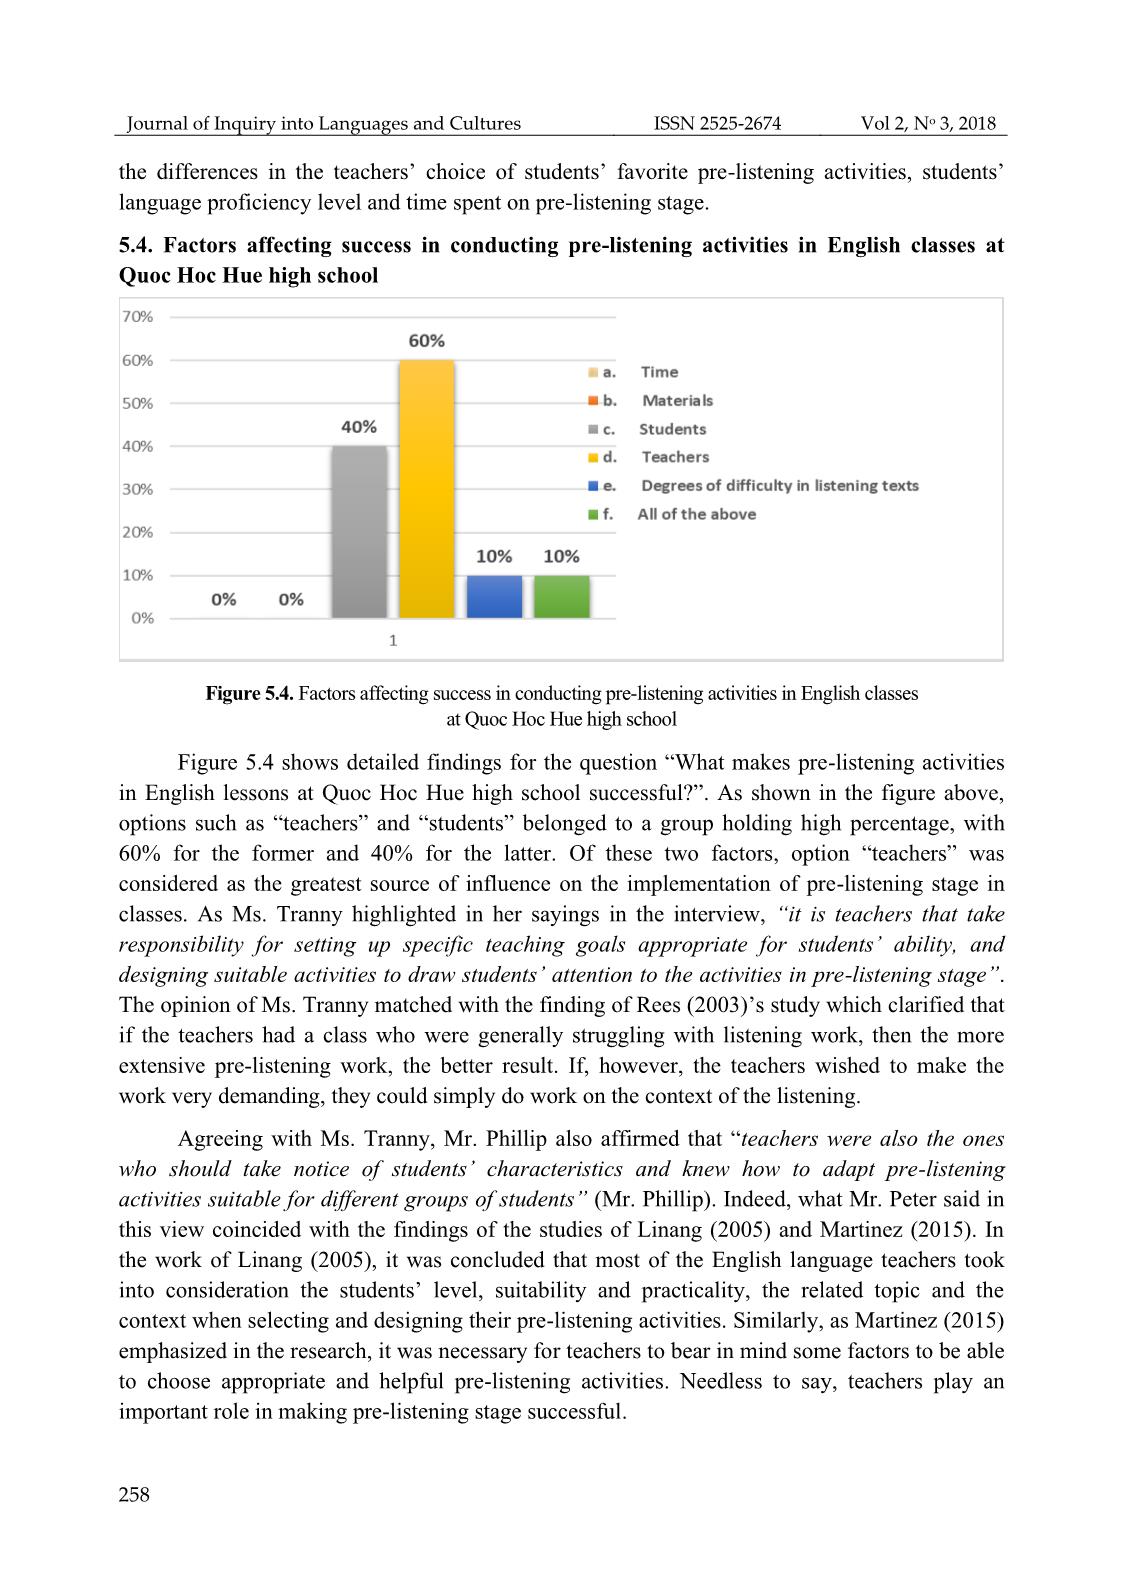 An investigation into efl teachers perceptions and practices of pre-Listening activities in english classes at Quoc Hoc Hue high school trang 10